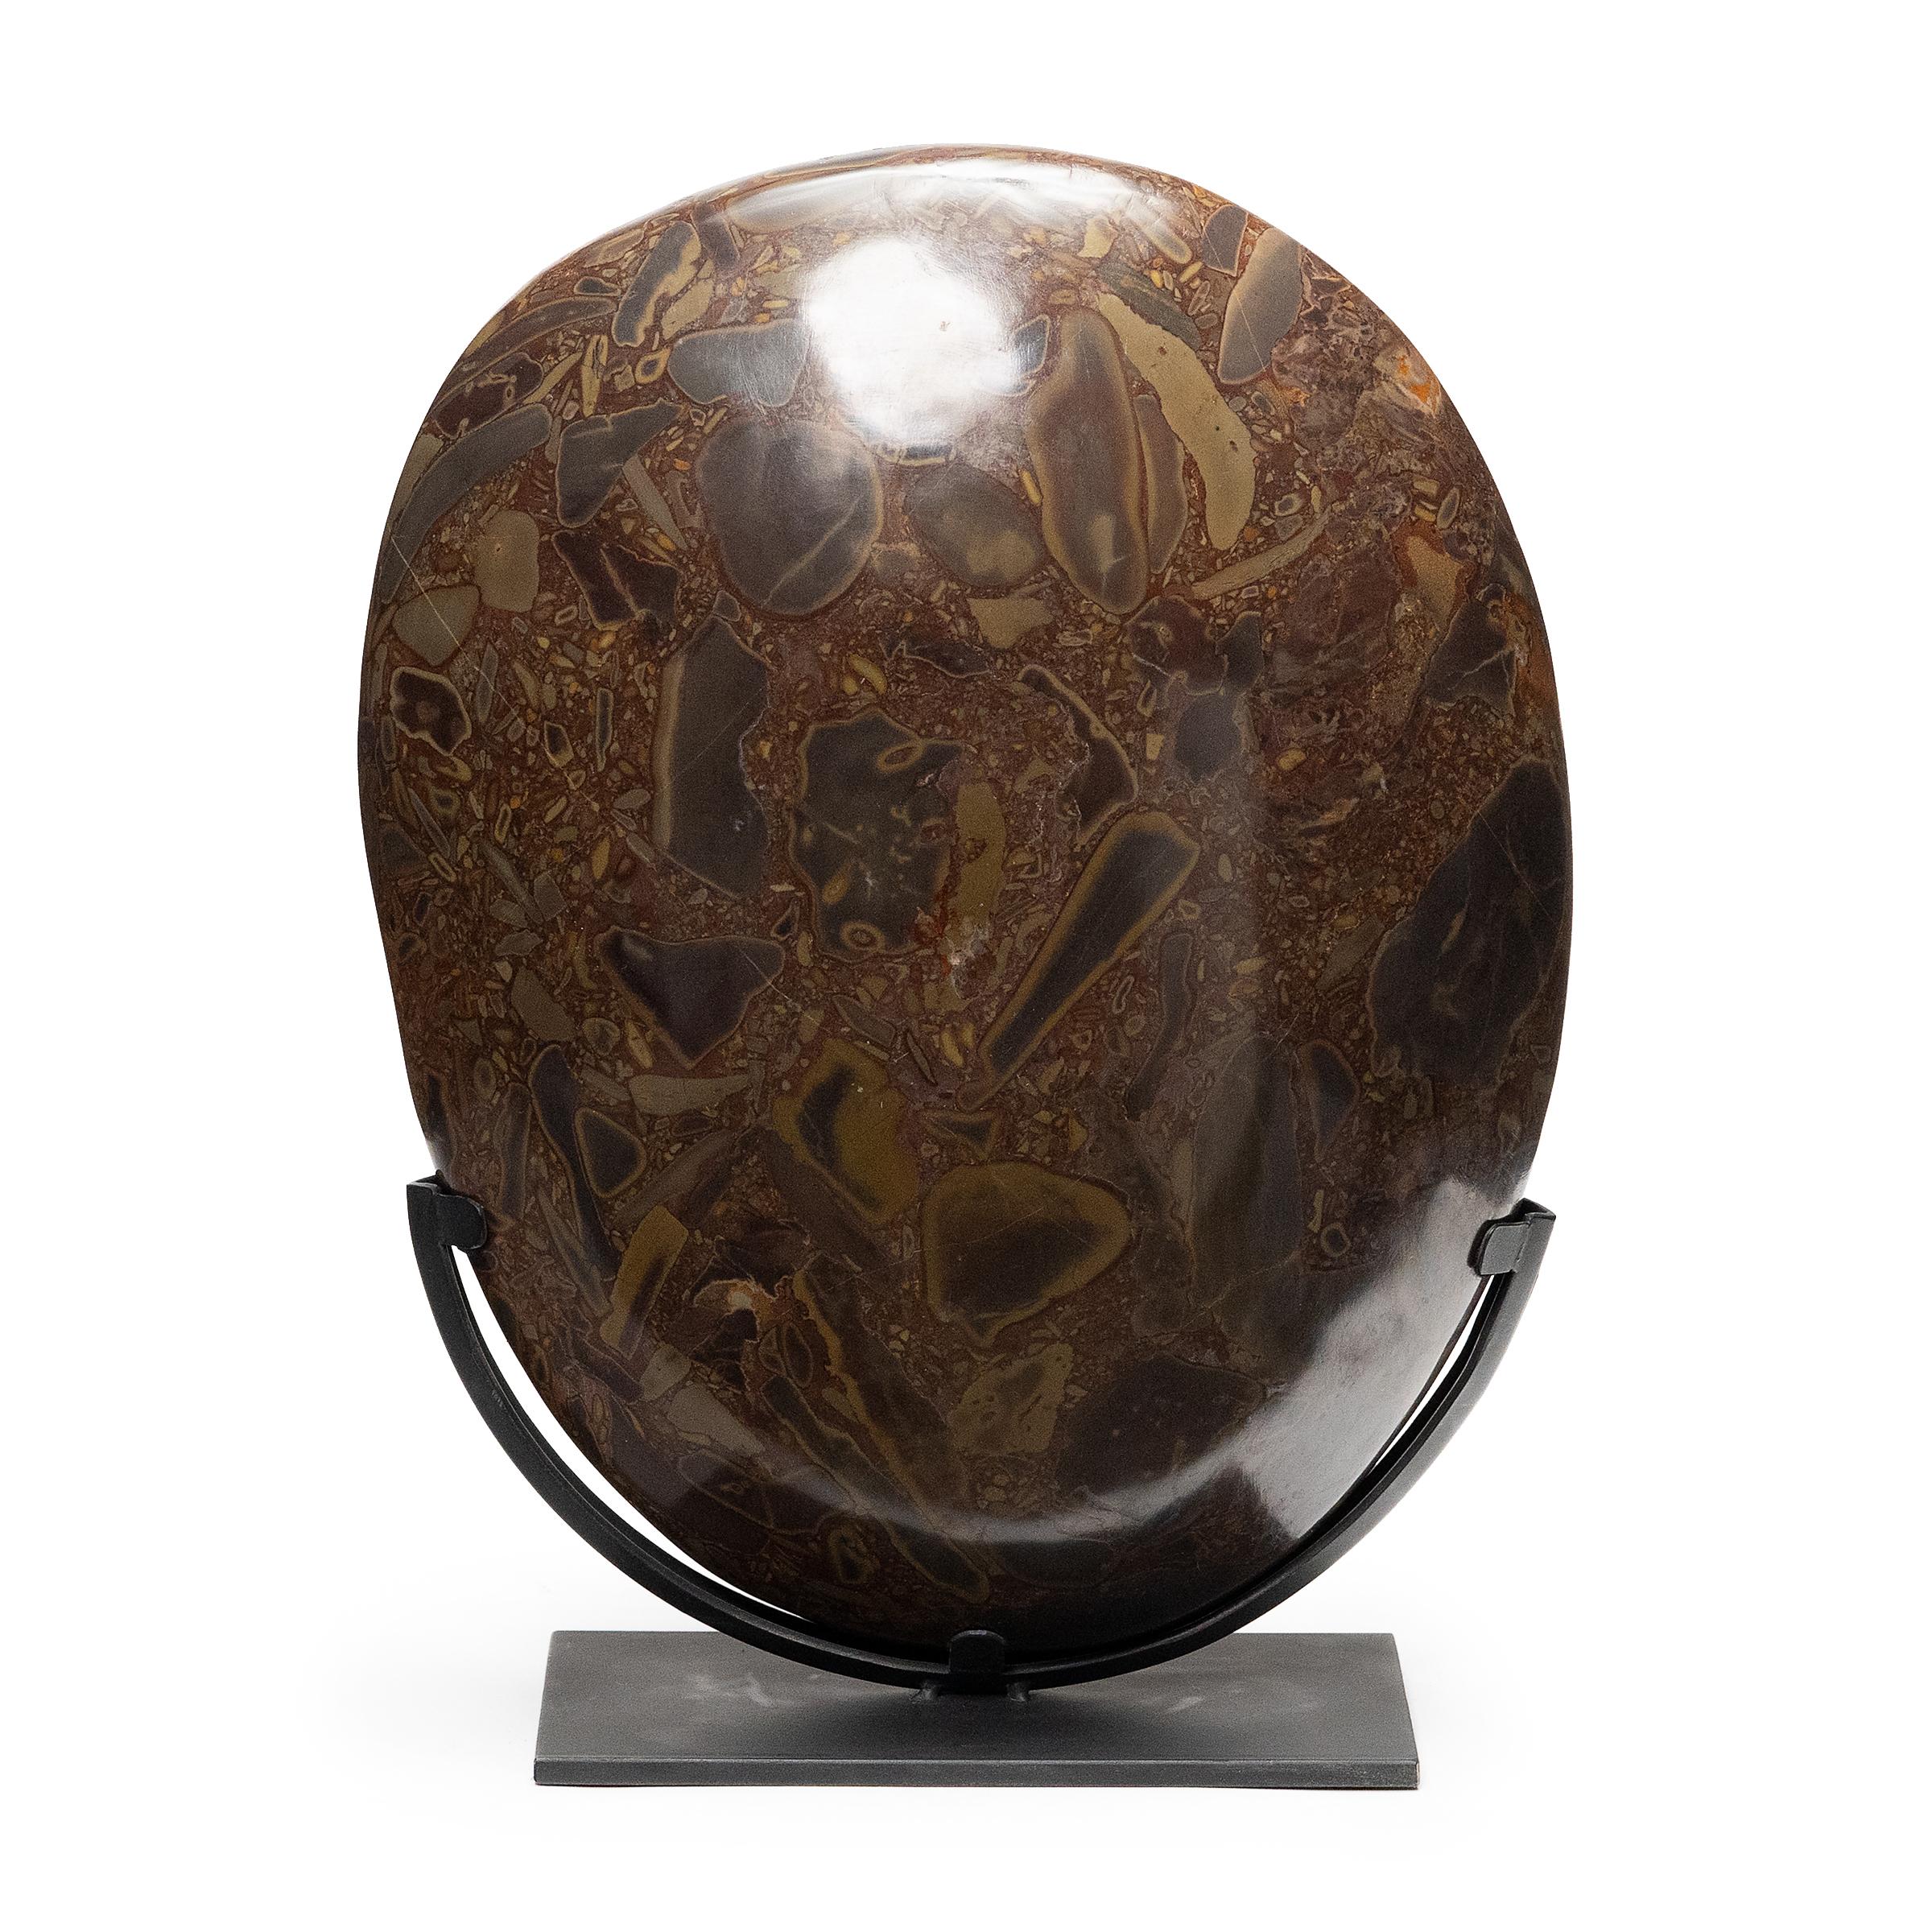 Puddingstone is named for its unique composite nature, a suspension of multicolored pebbles that resemble raisins in a pudding. Historically, the unusual stone was favored by scholar-artists and calligraphers as an ideal surface on which to place